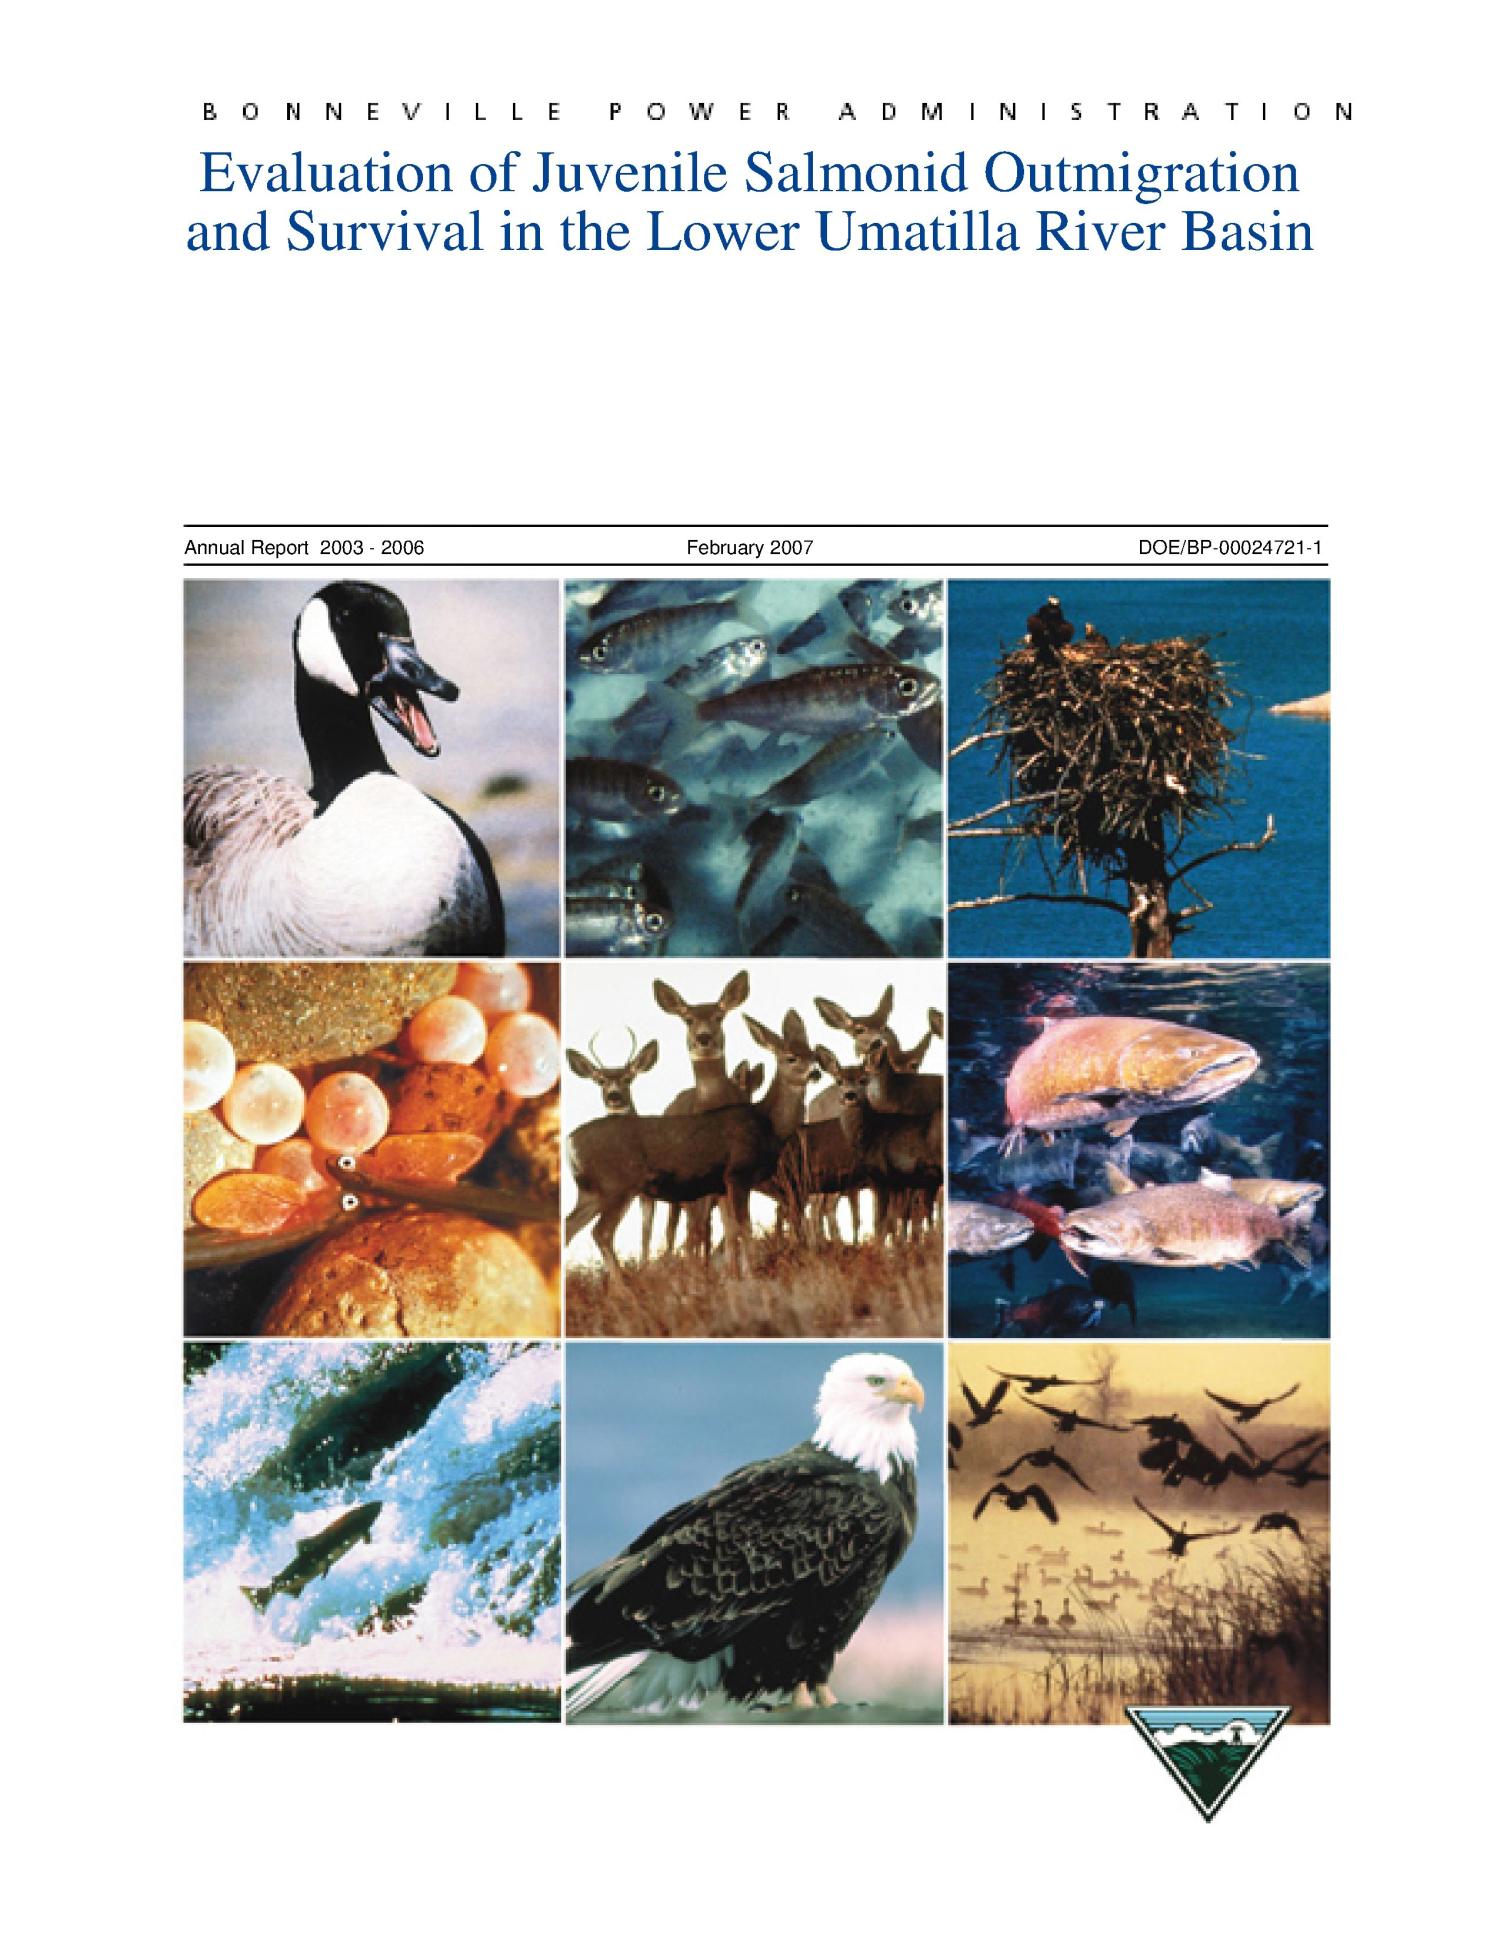 Evaluation of Juvenile Salmonid Outmigration and Survival in the Lower Umatilla River Basin, Annual Report 2003-2006.
                                                
                                                    [Sequence #]: 1 of 131
                                                